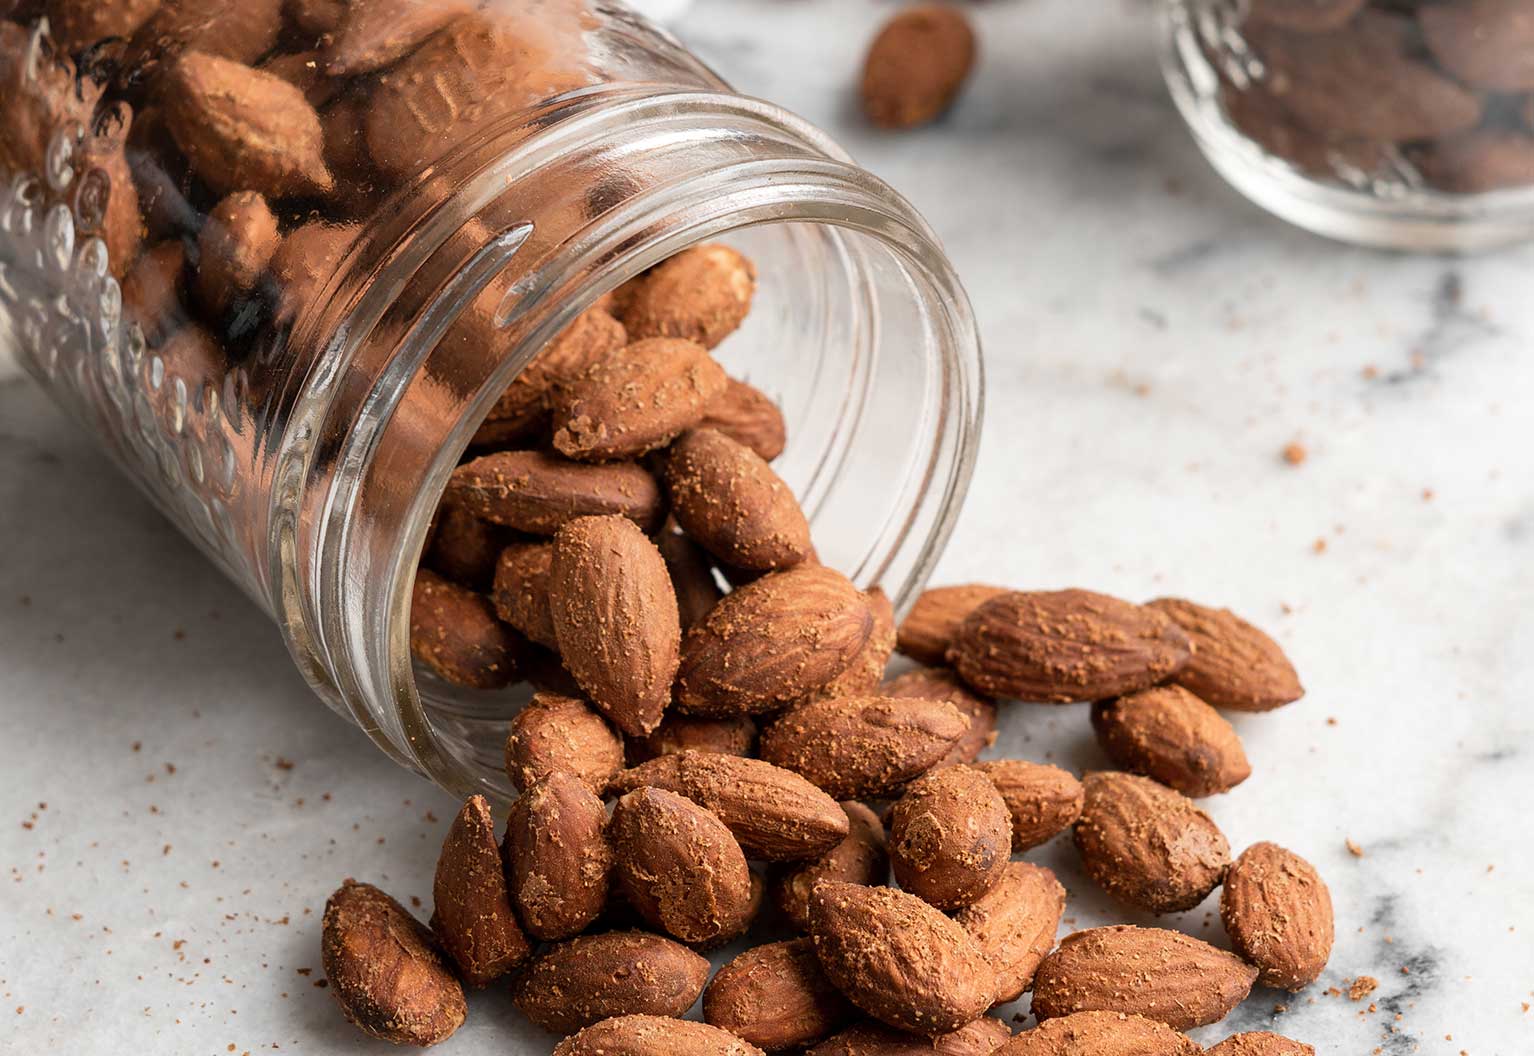 Savory almonds roasted with ginger and garlic spilling out of a jar